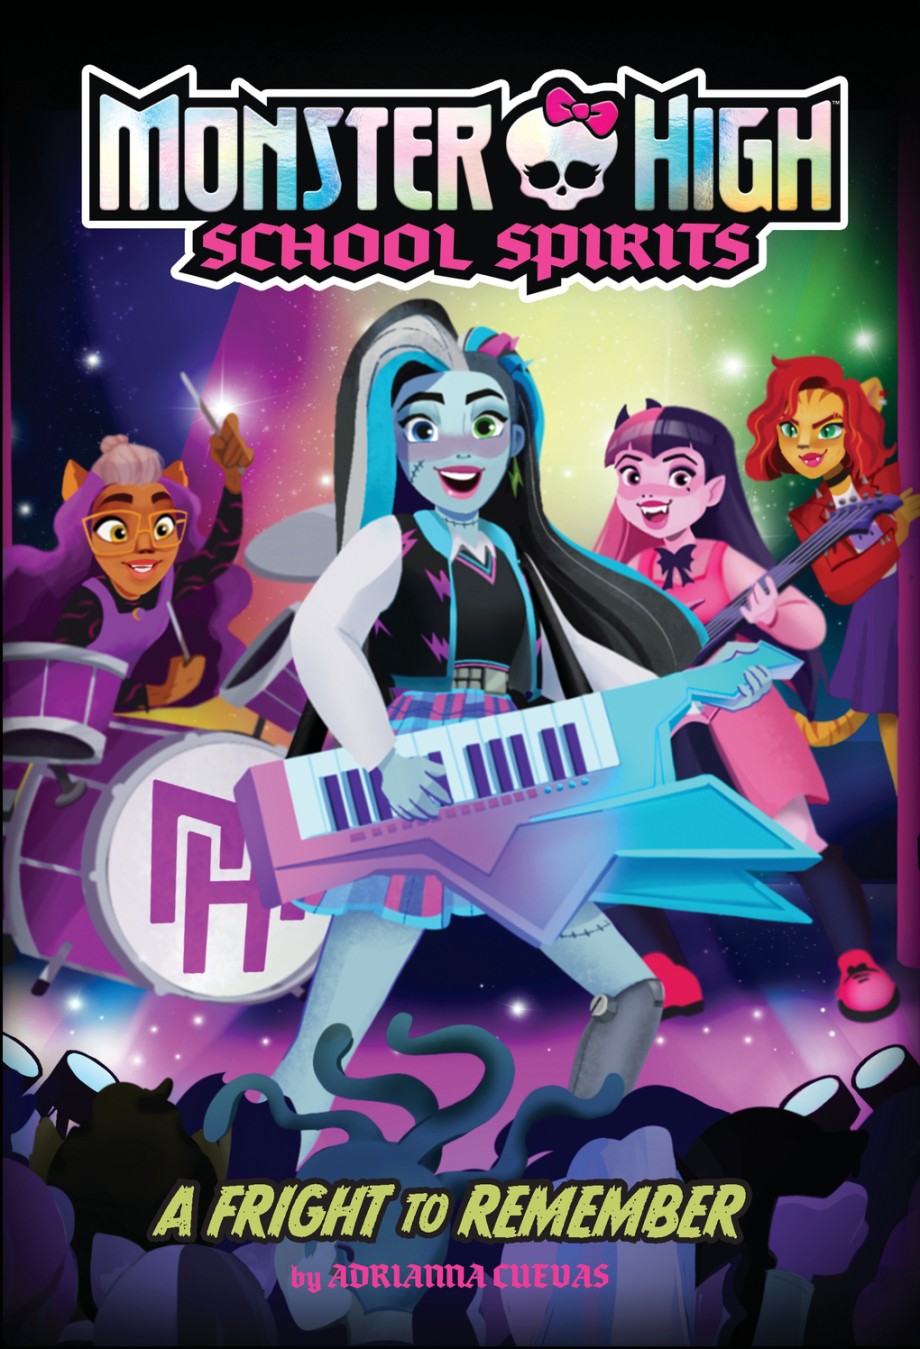 Fright to Remember (Monster High School Spirits #1) 